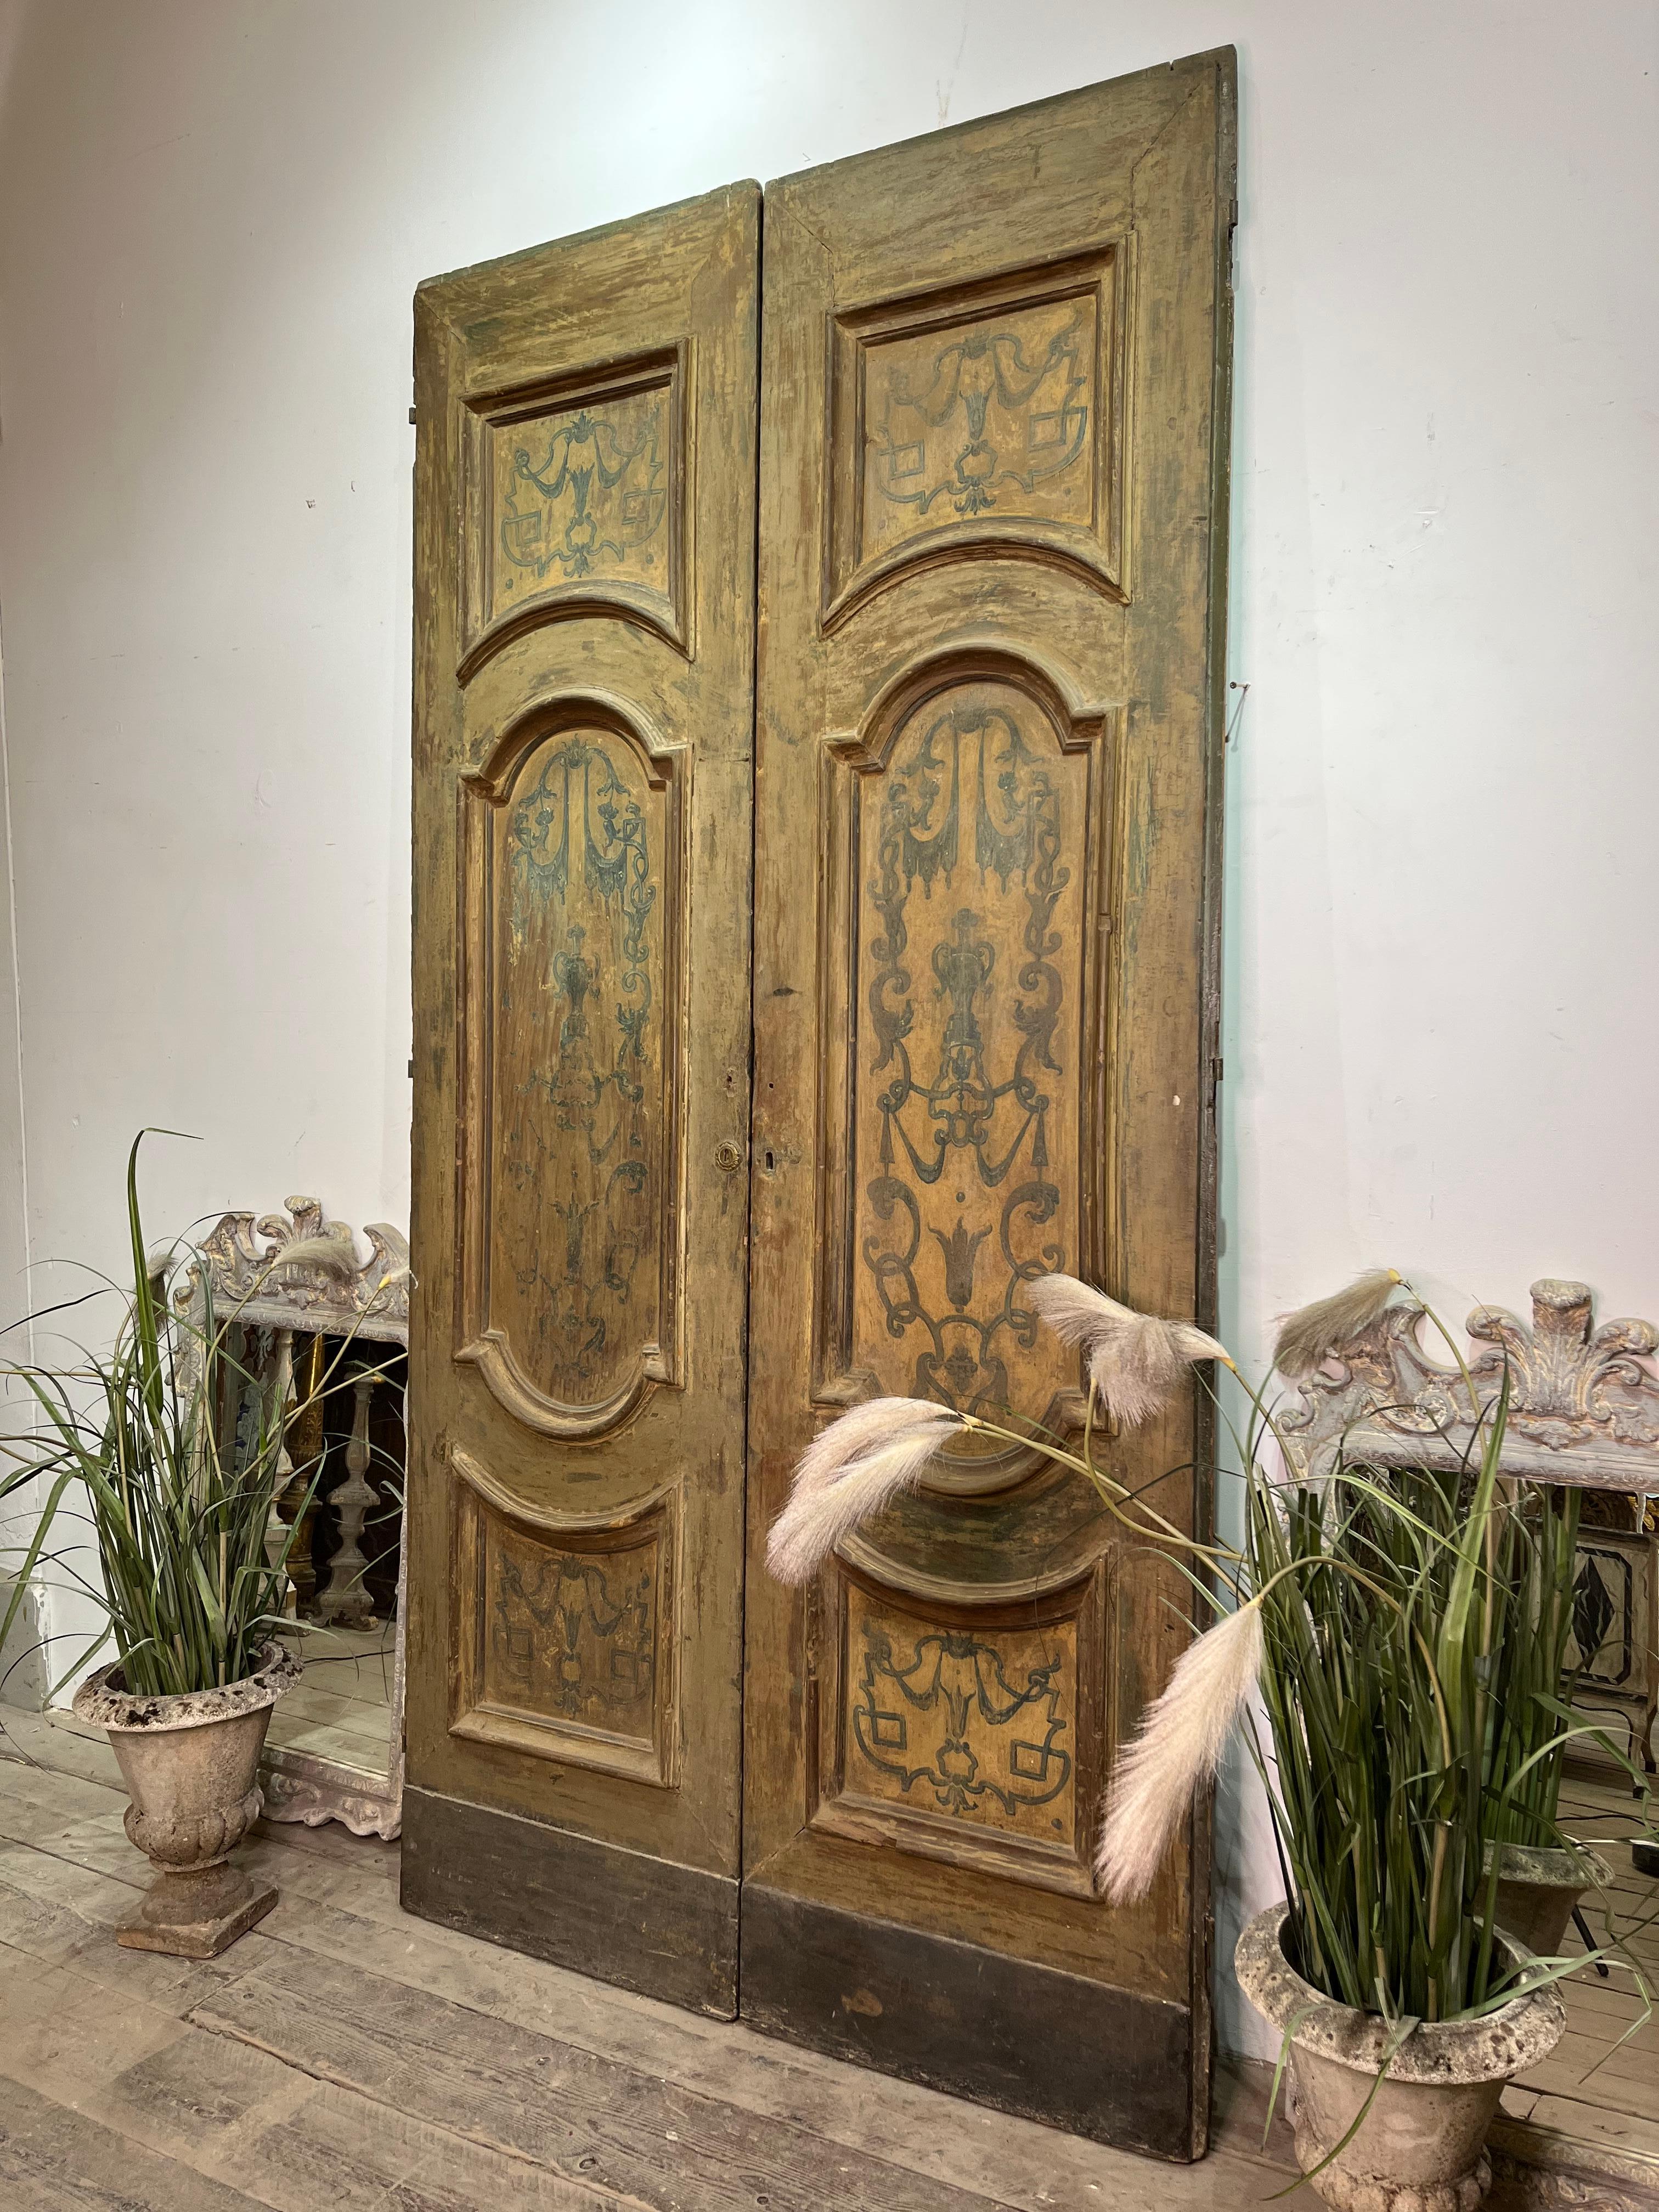 Majestic and large size first 18thC doorway from Napoli, Italy.
Beautiful first patina with decorations inside each frame.
Original hardware. Backside is simpler.
It can be set in its exact role as doorway or be used as a decorative element.